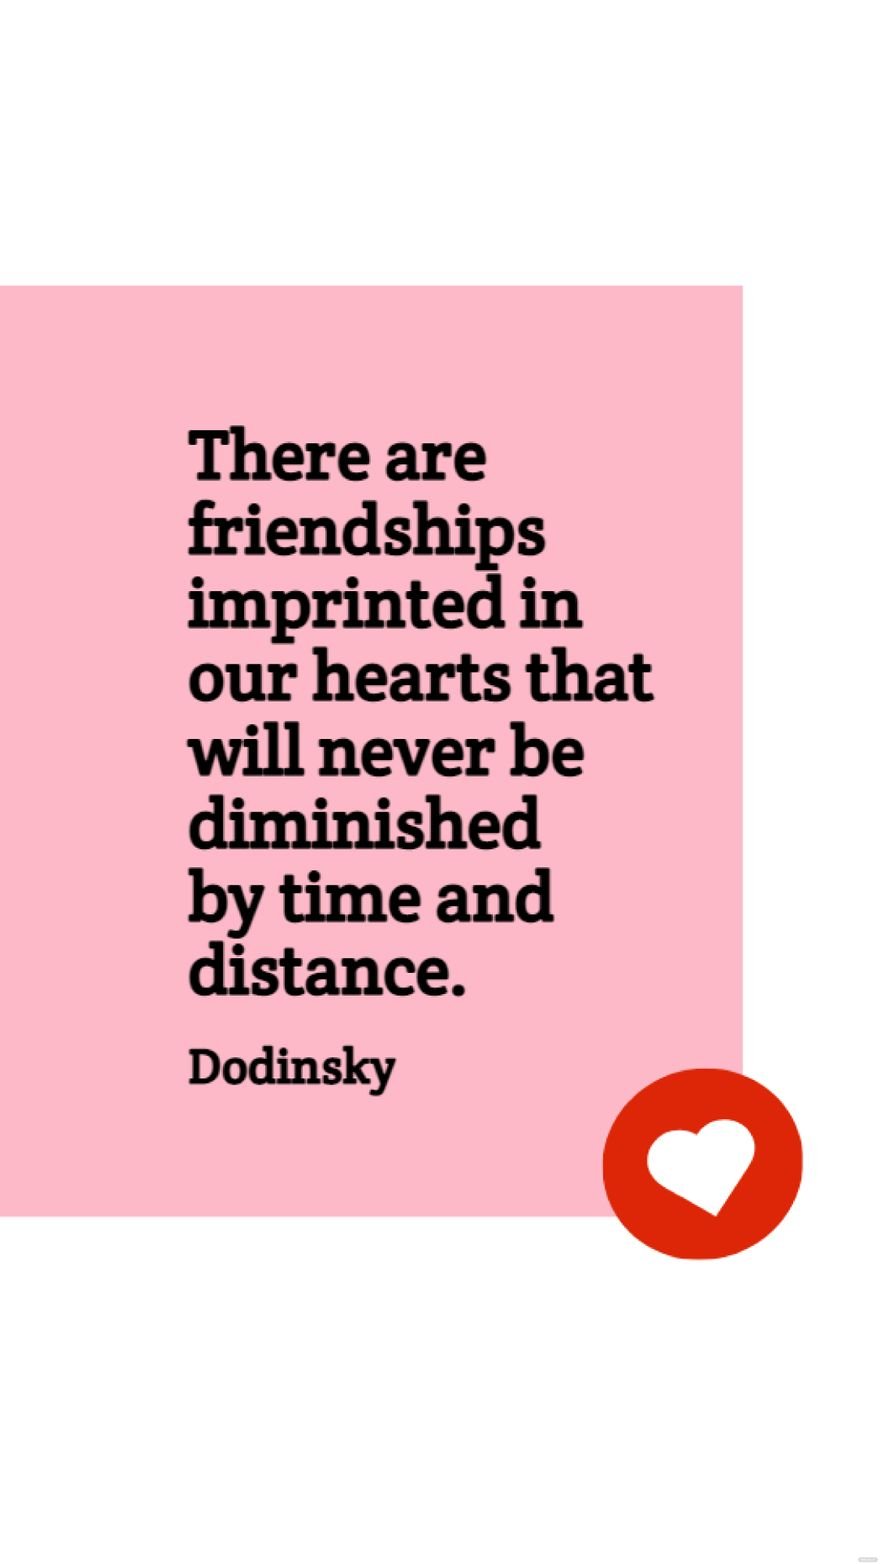 Dodinsky - There are friendships imprinted in our hearts that will never be diminished by time and distance. Template